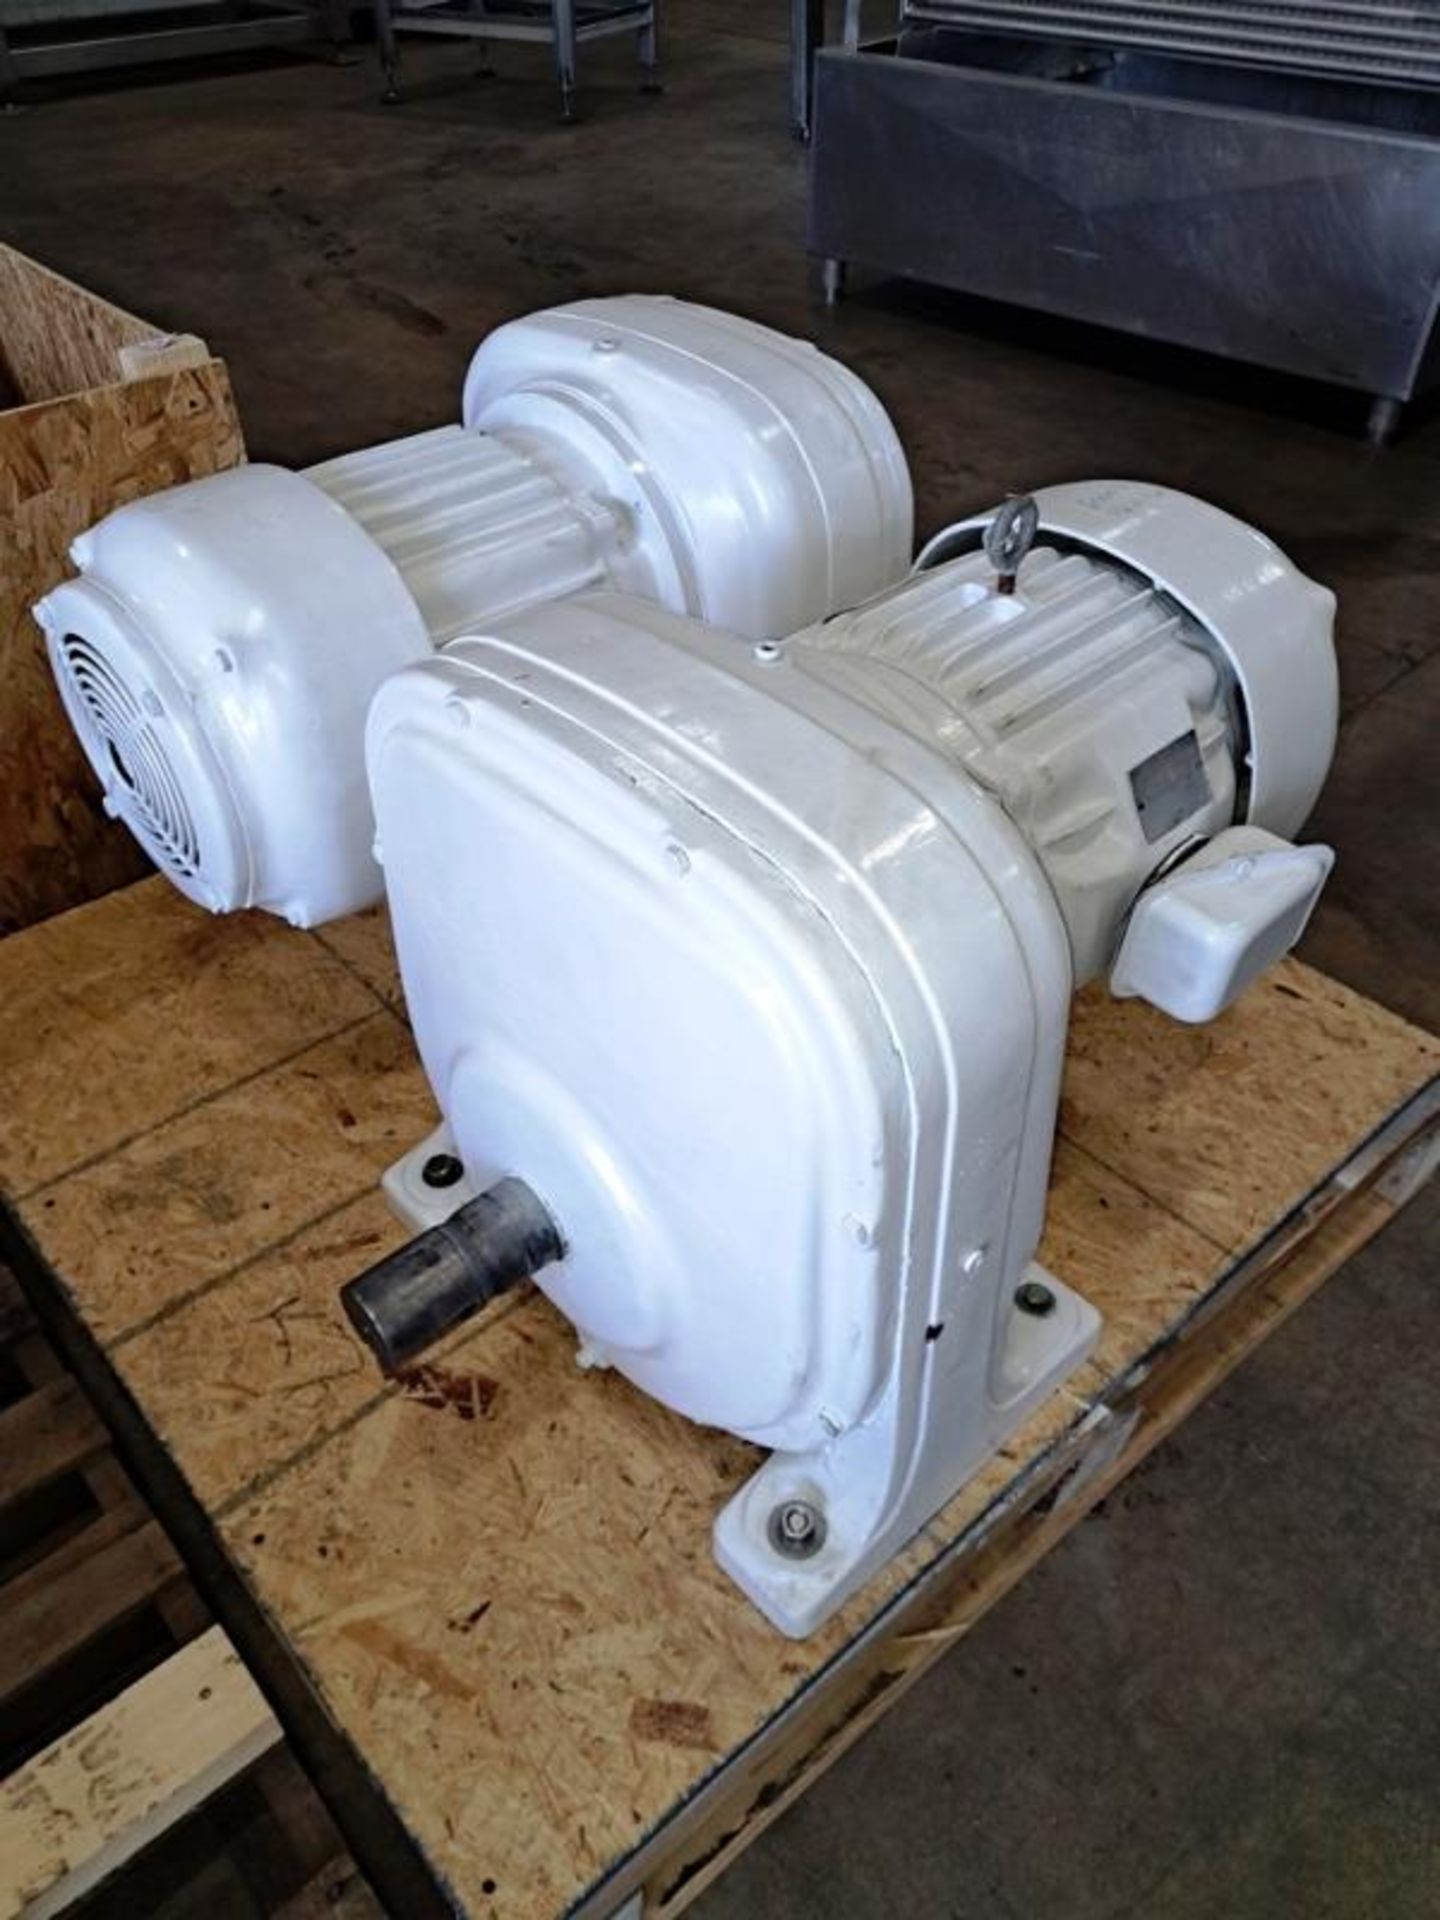 Lot of (2) Rebuilt 100 H.P. Motors and Gearboxes, 230/460 volts, 3 phase, approximately